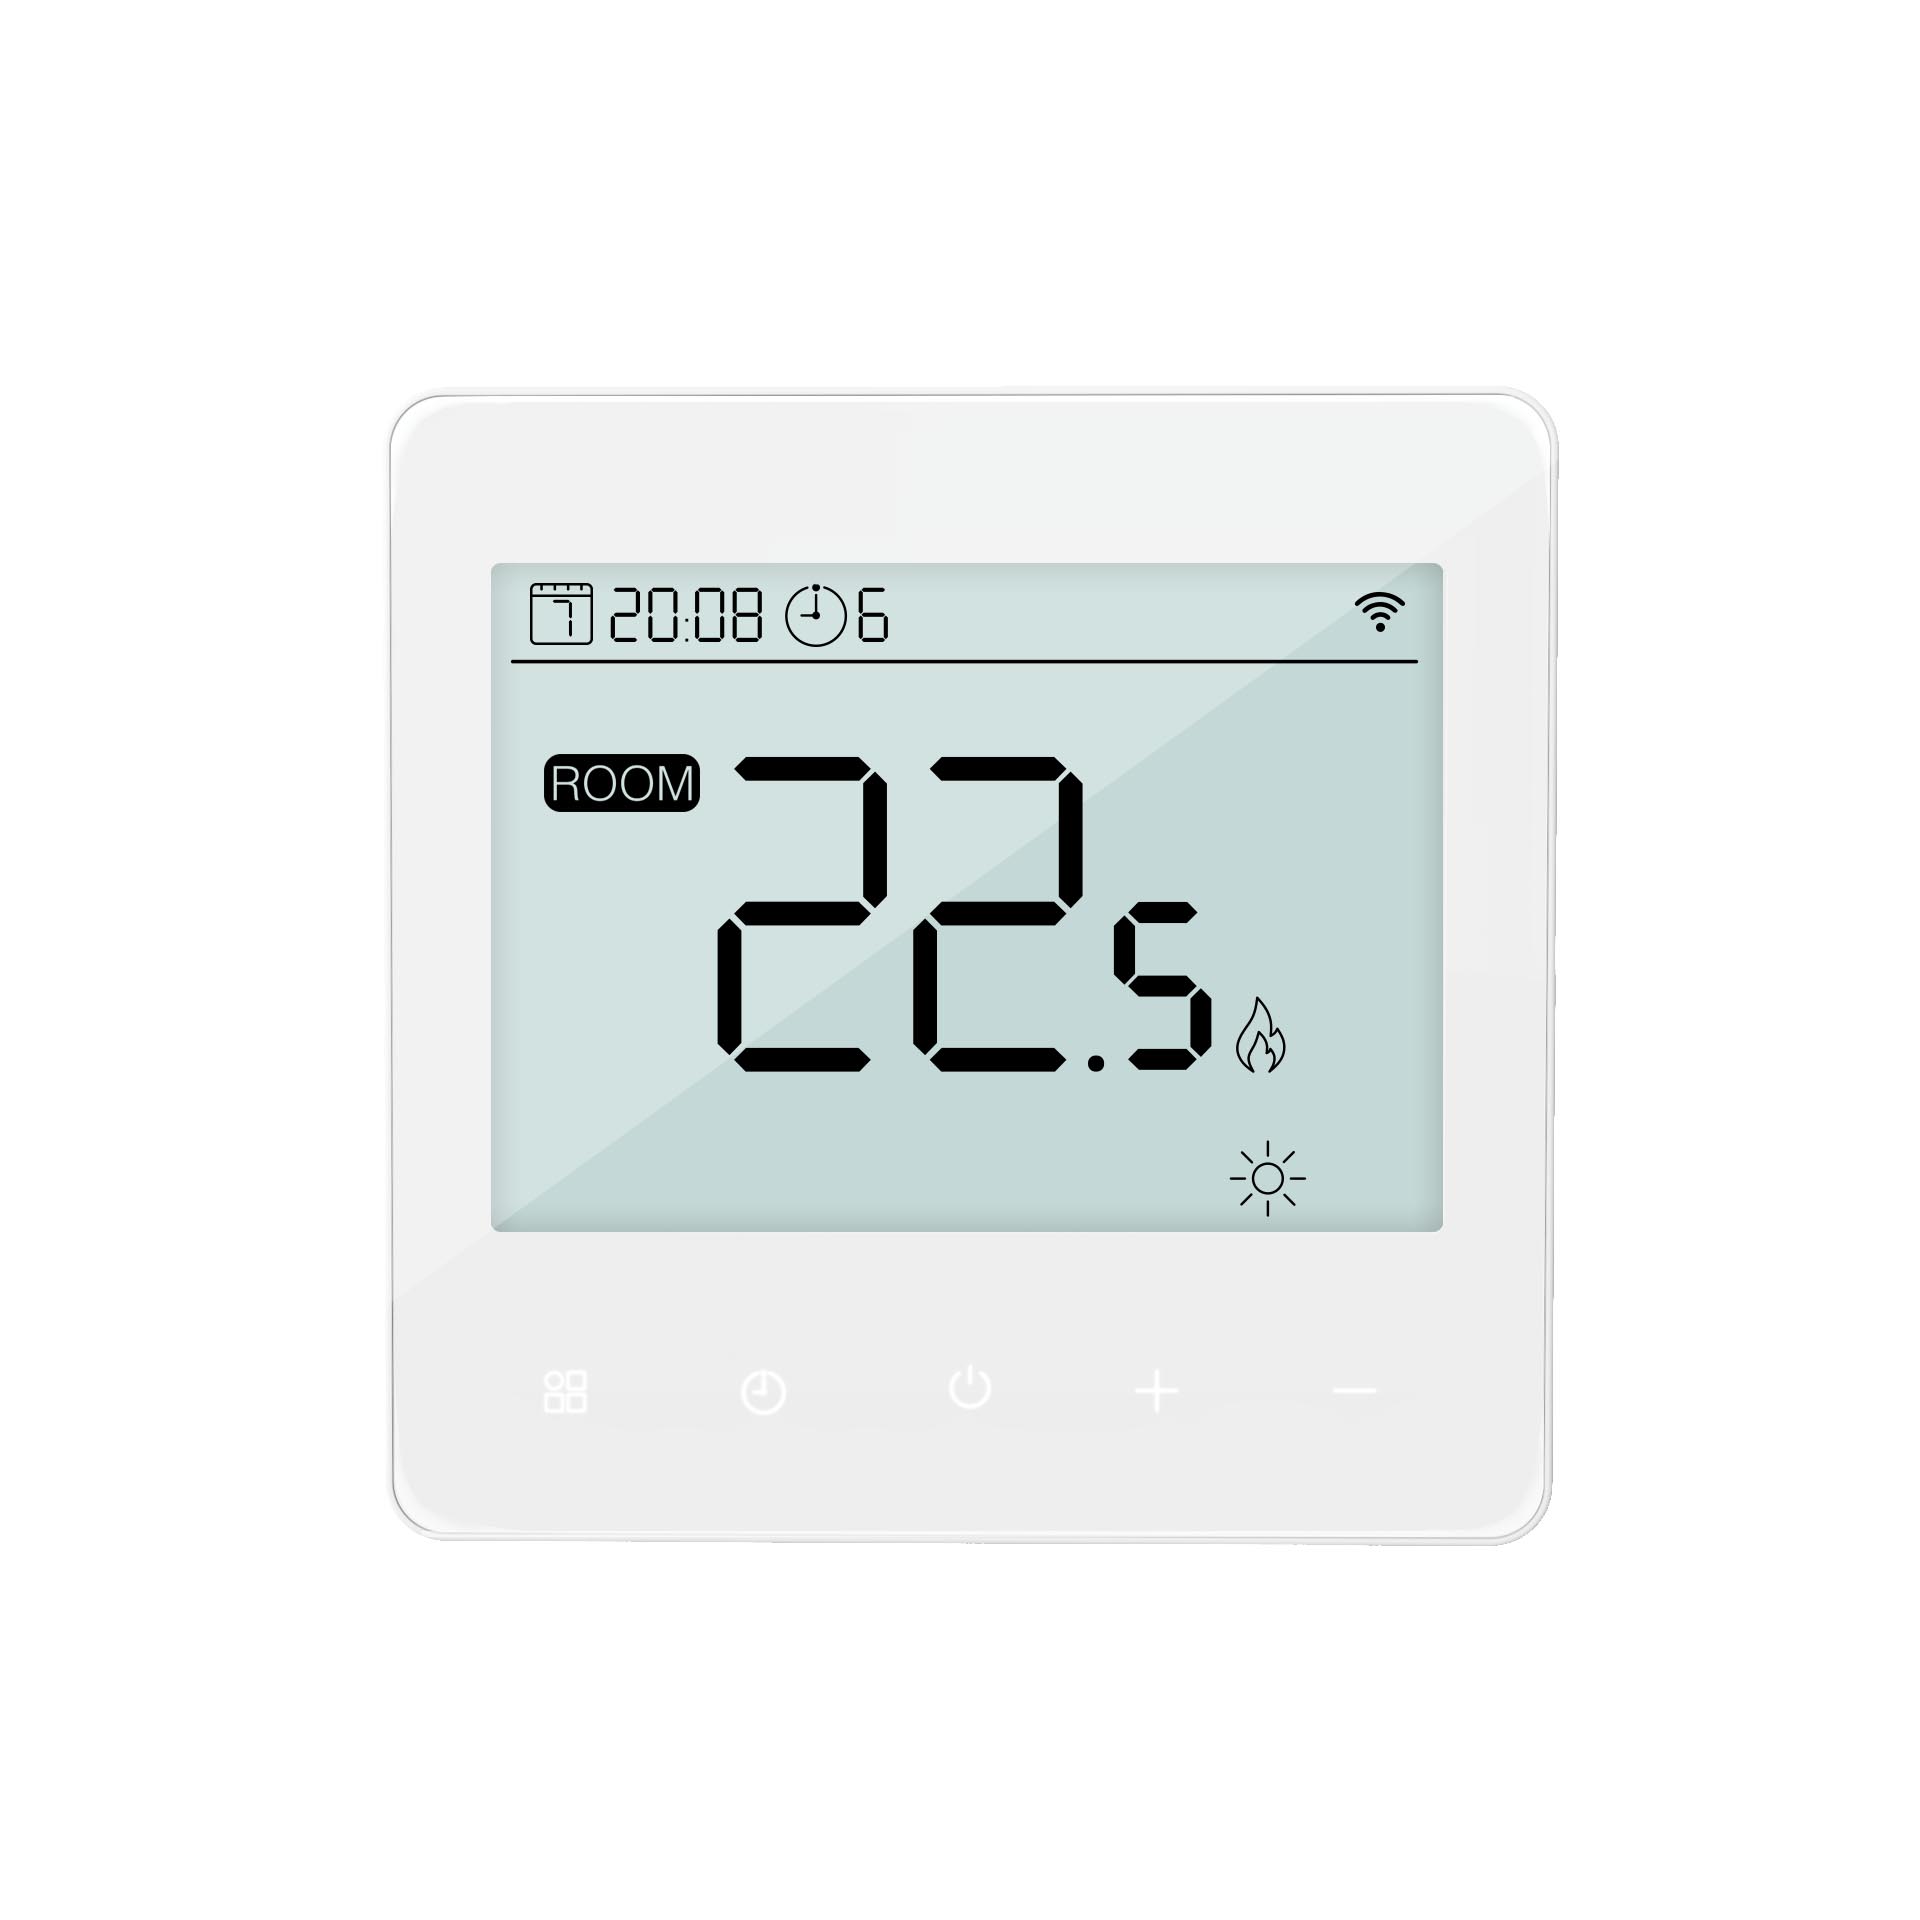 Smart Heating cooling thermostat 